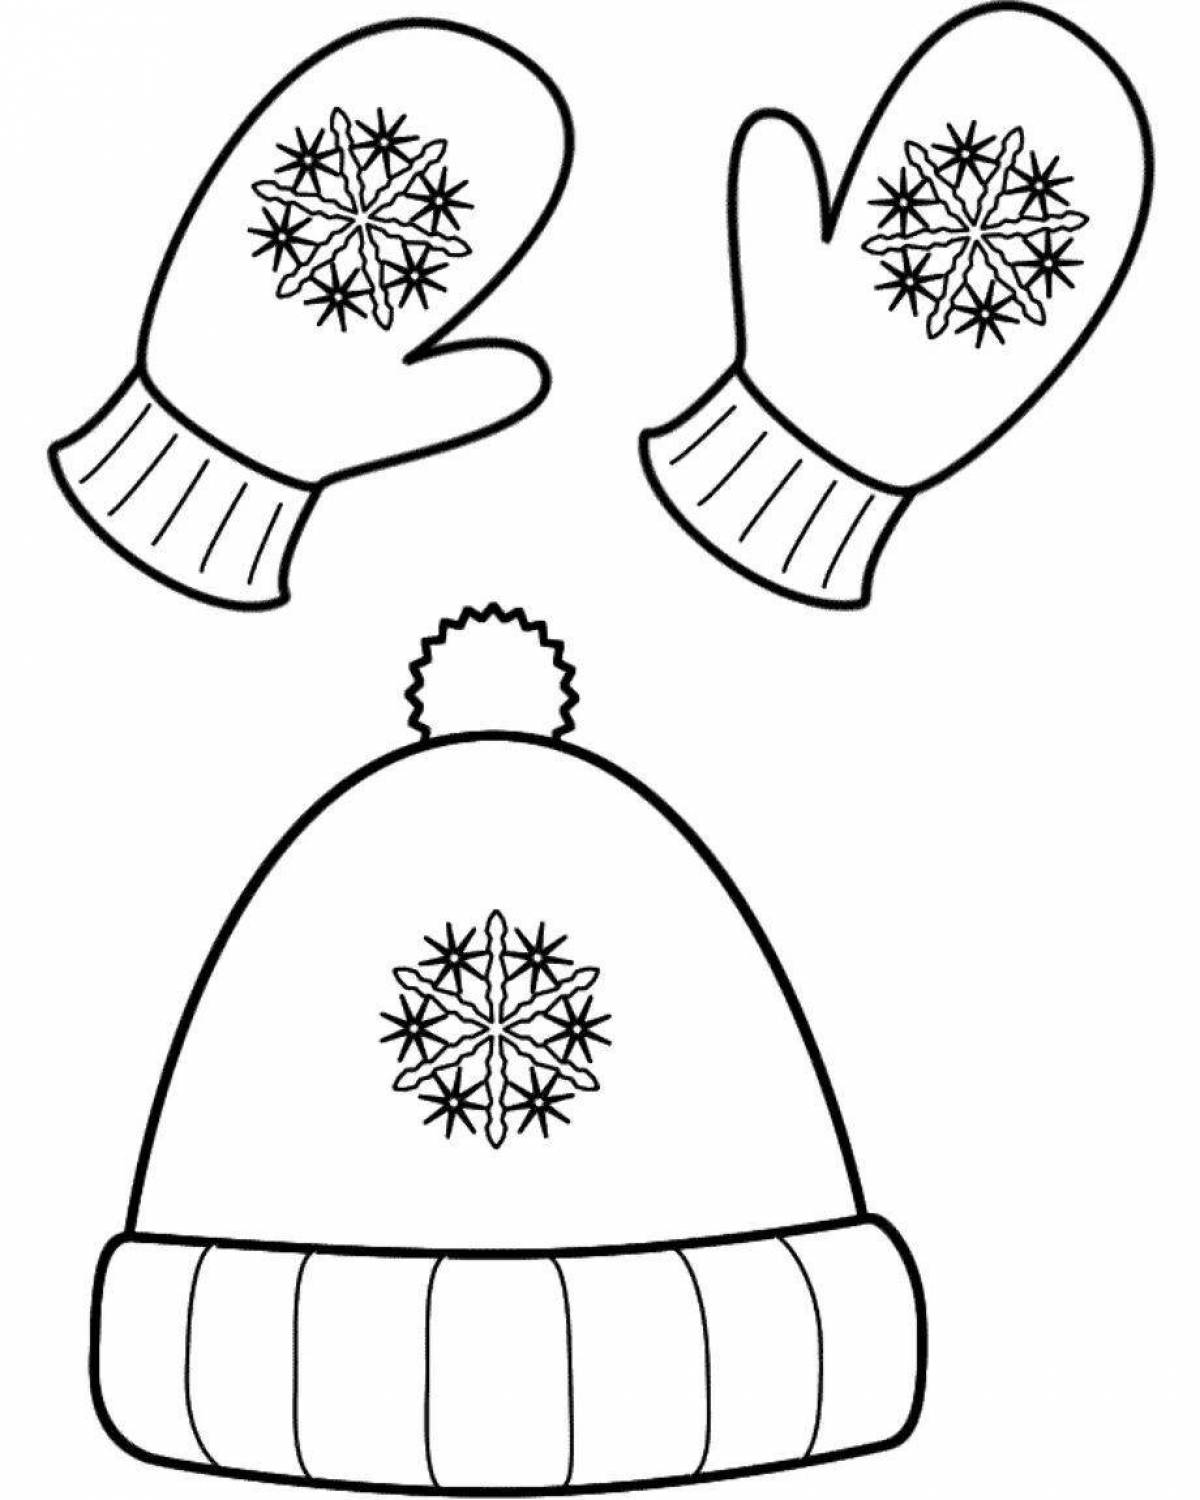 Great winter coloring book for kids 2-3 years old